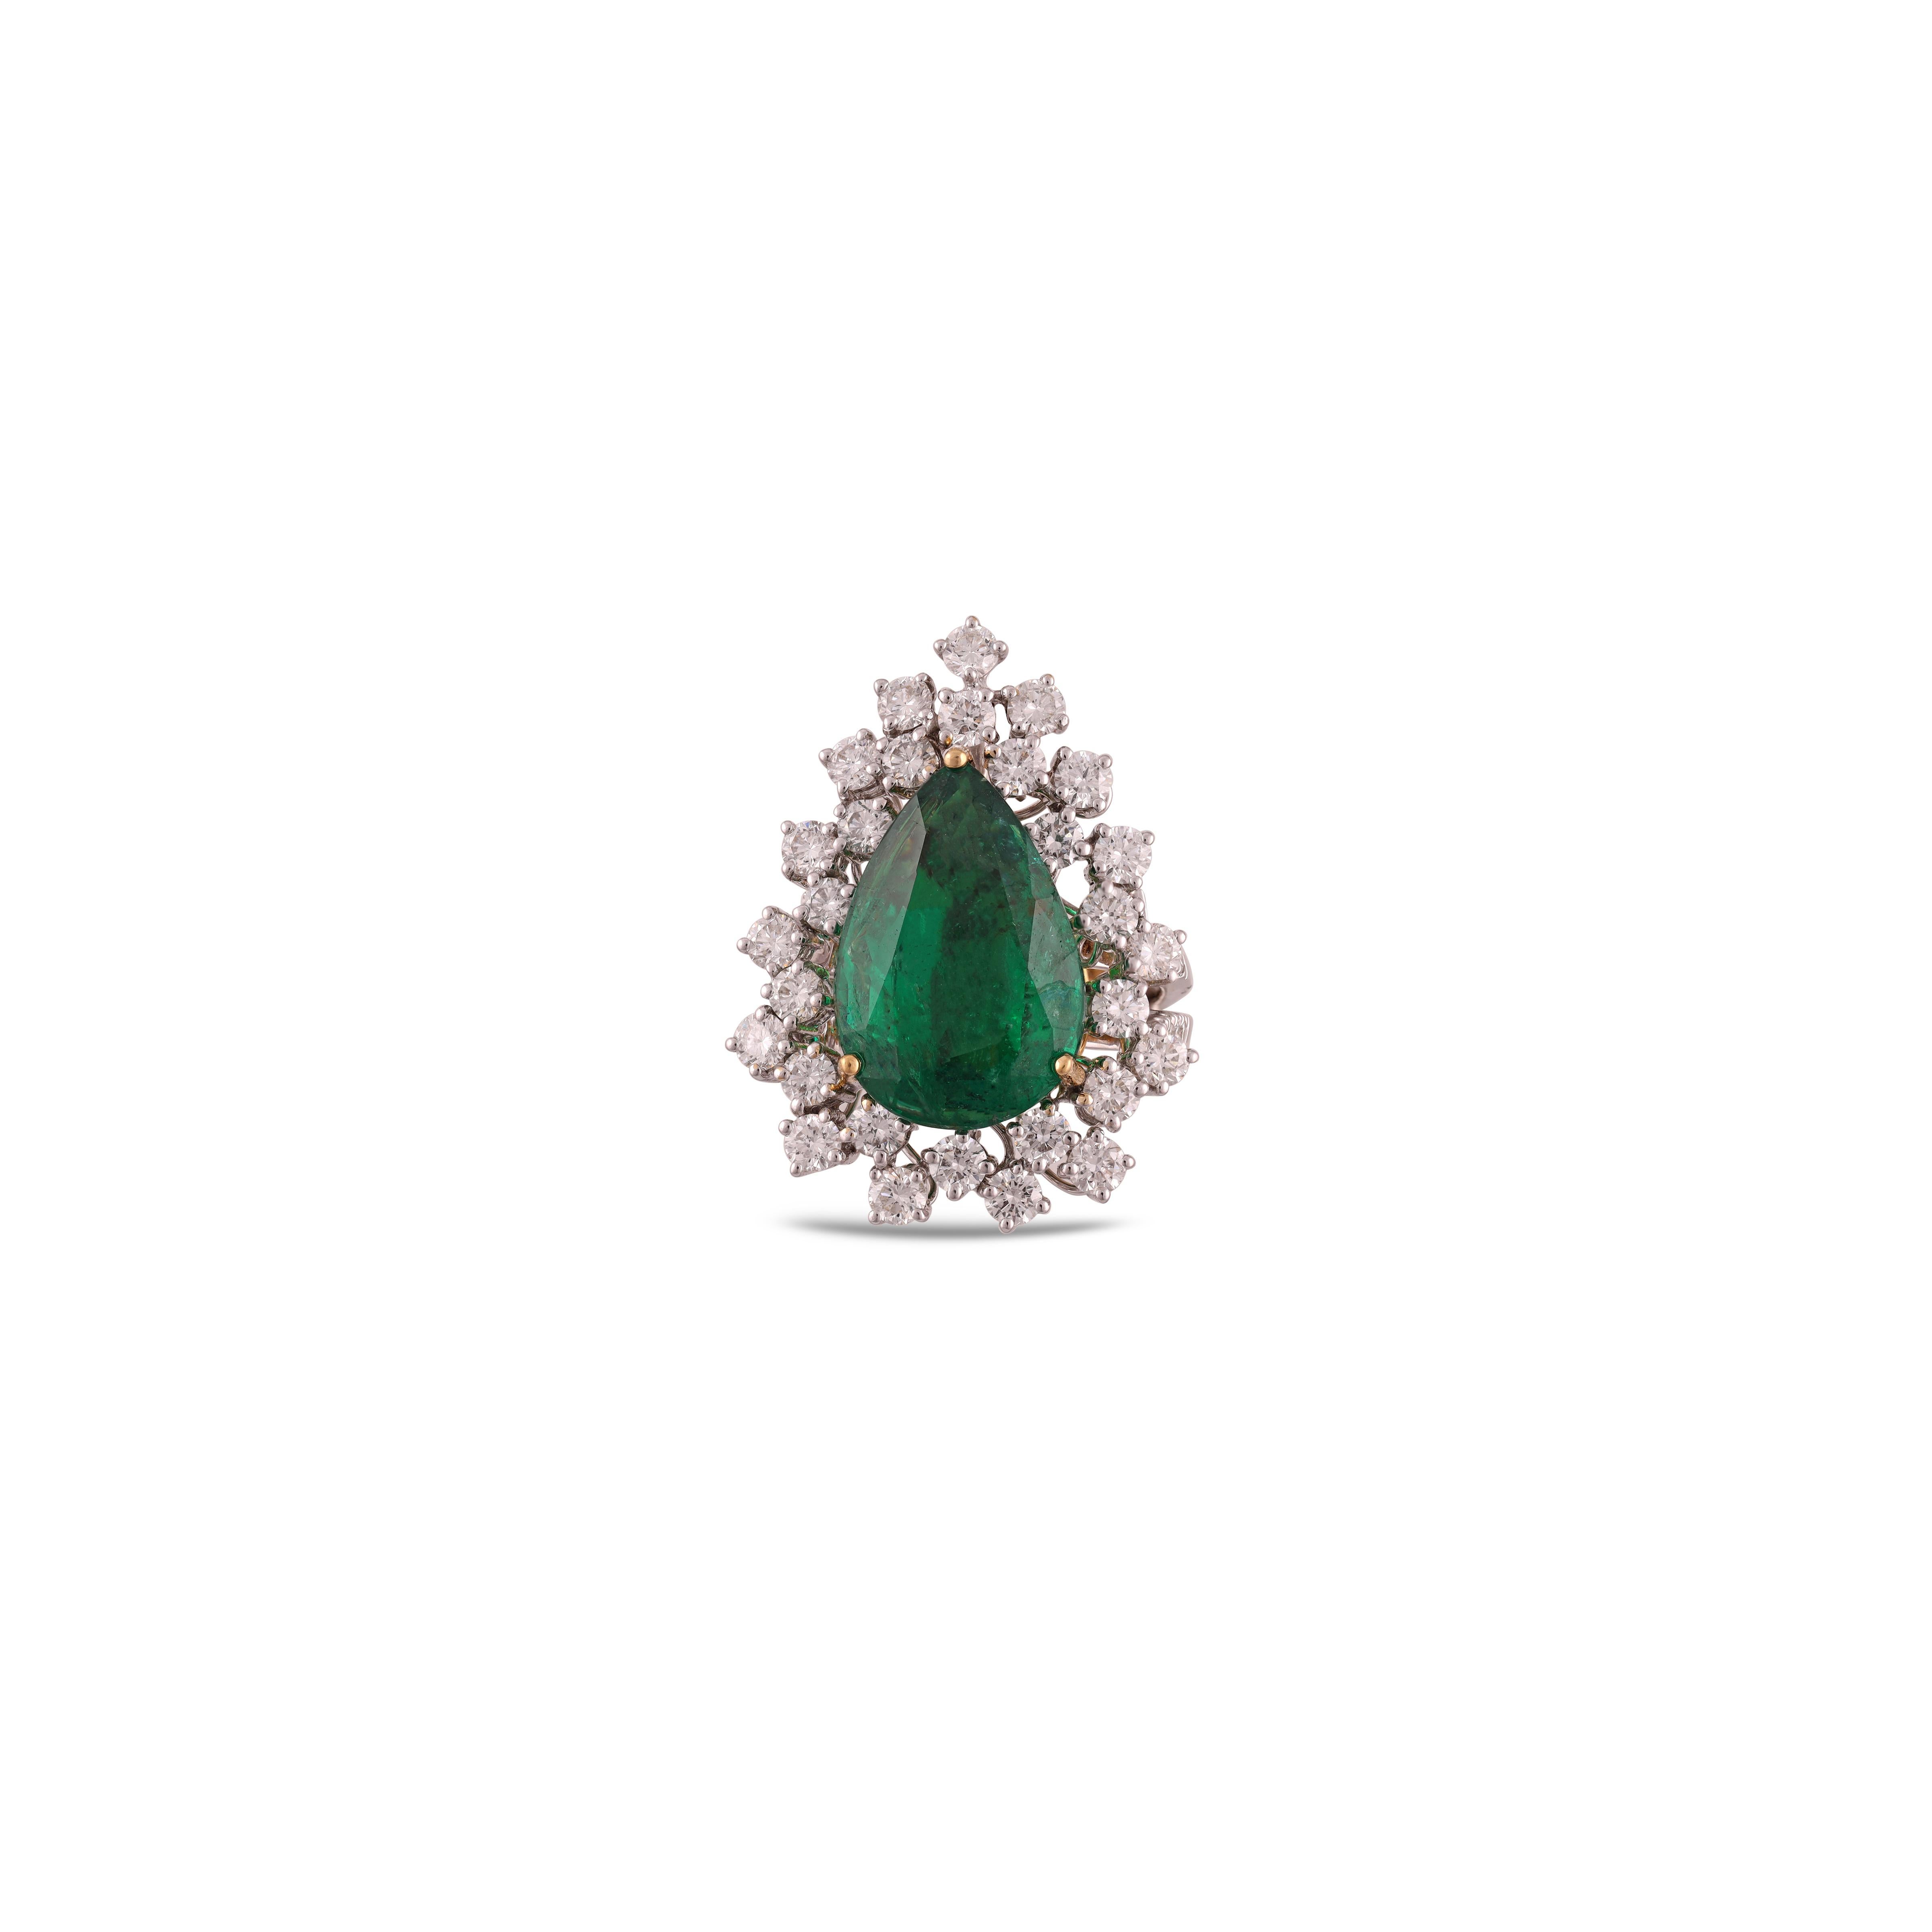 This is an elegant emerald & diamond ring studded in 18k White gold with 1 piece of  Zambian emerald weight 9.01 carat which is surrounded by 49 pieces of  diamonds weight 2.67 carat, this entire ring studded in 18k White gold.

THIS RING COMES